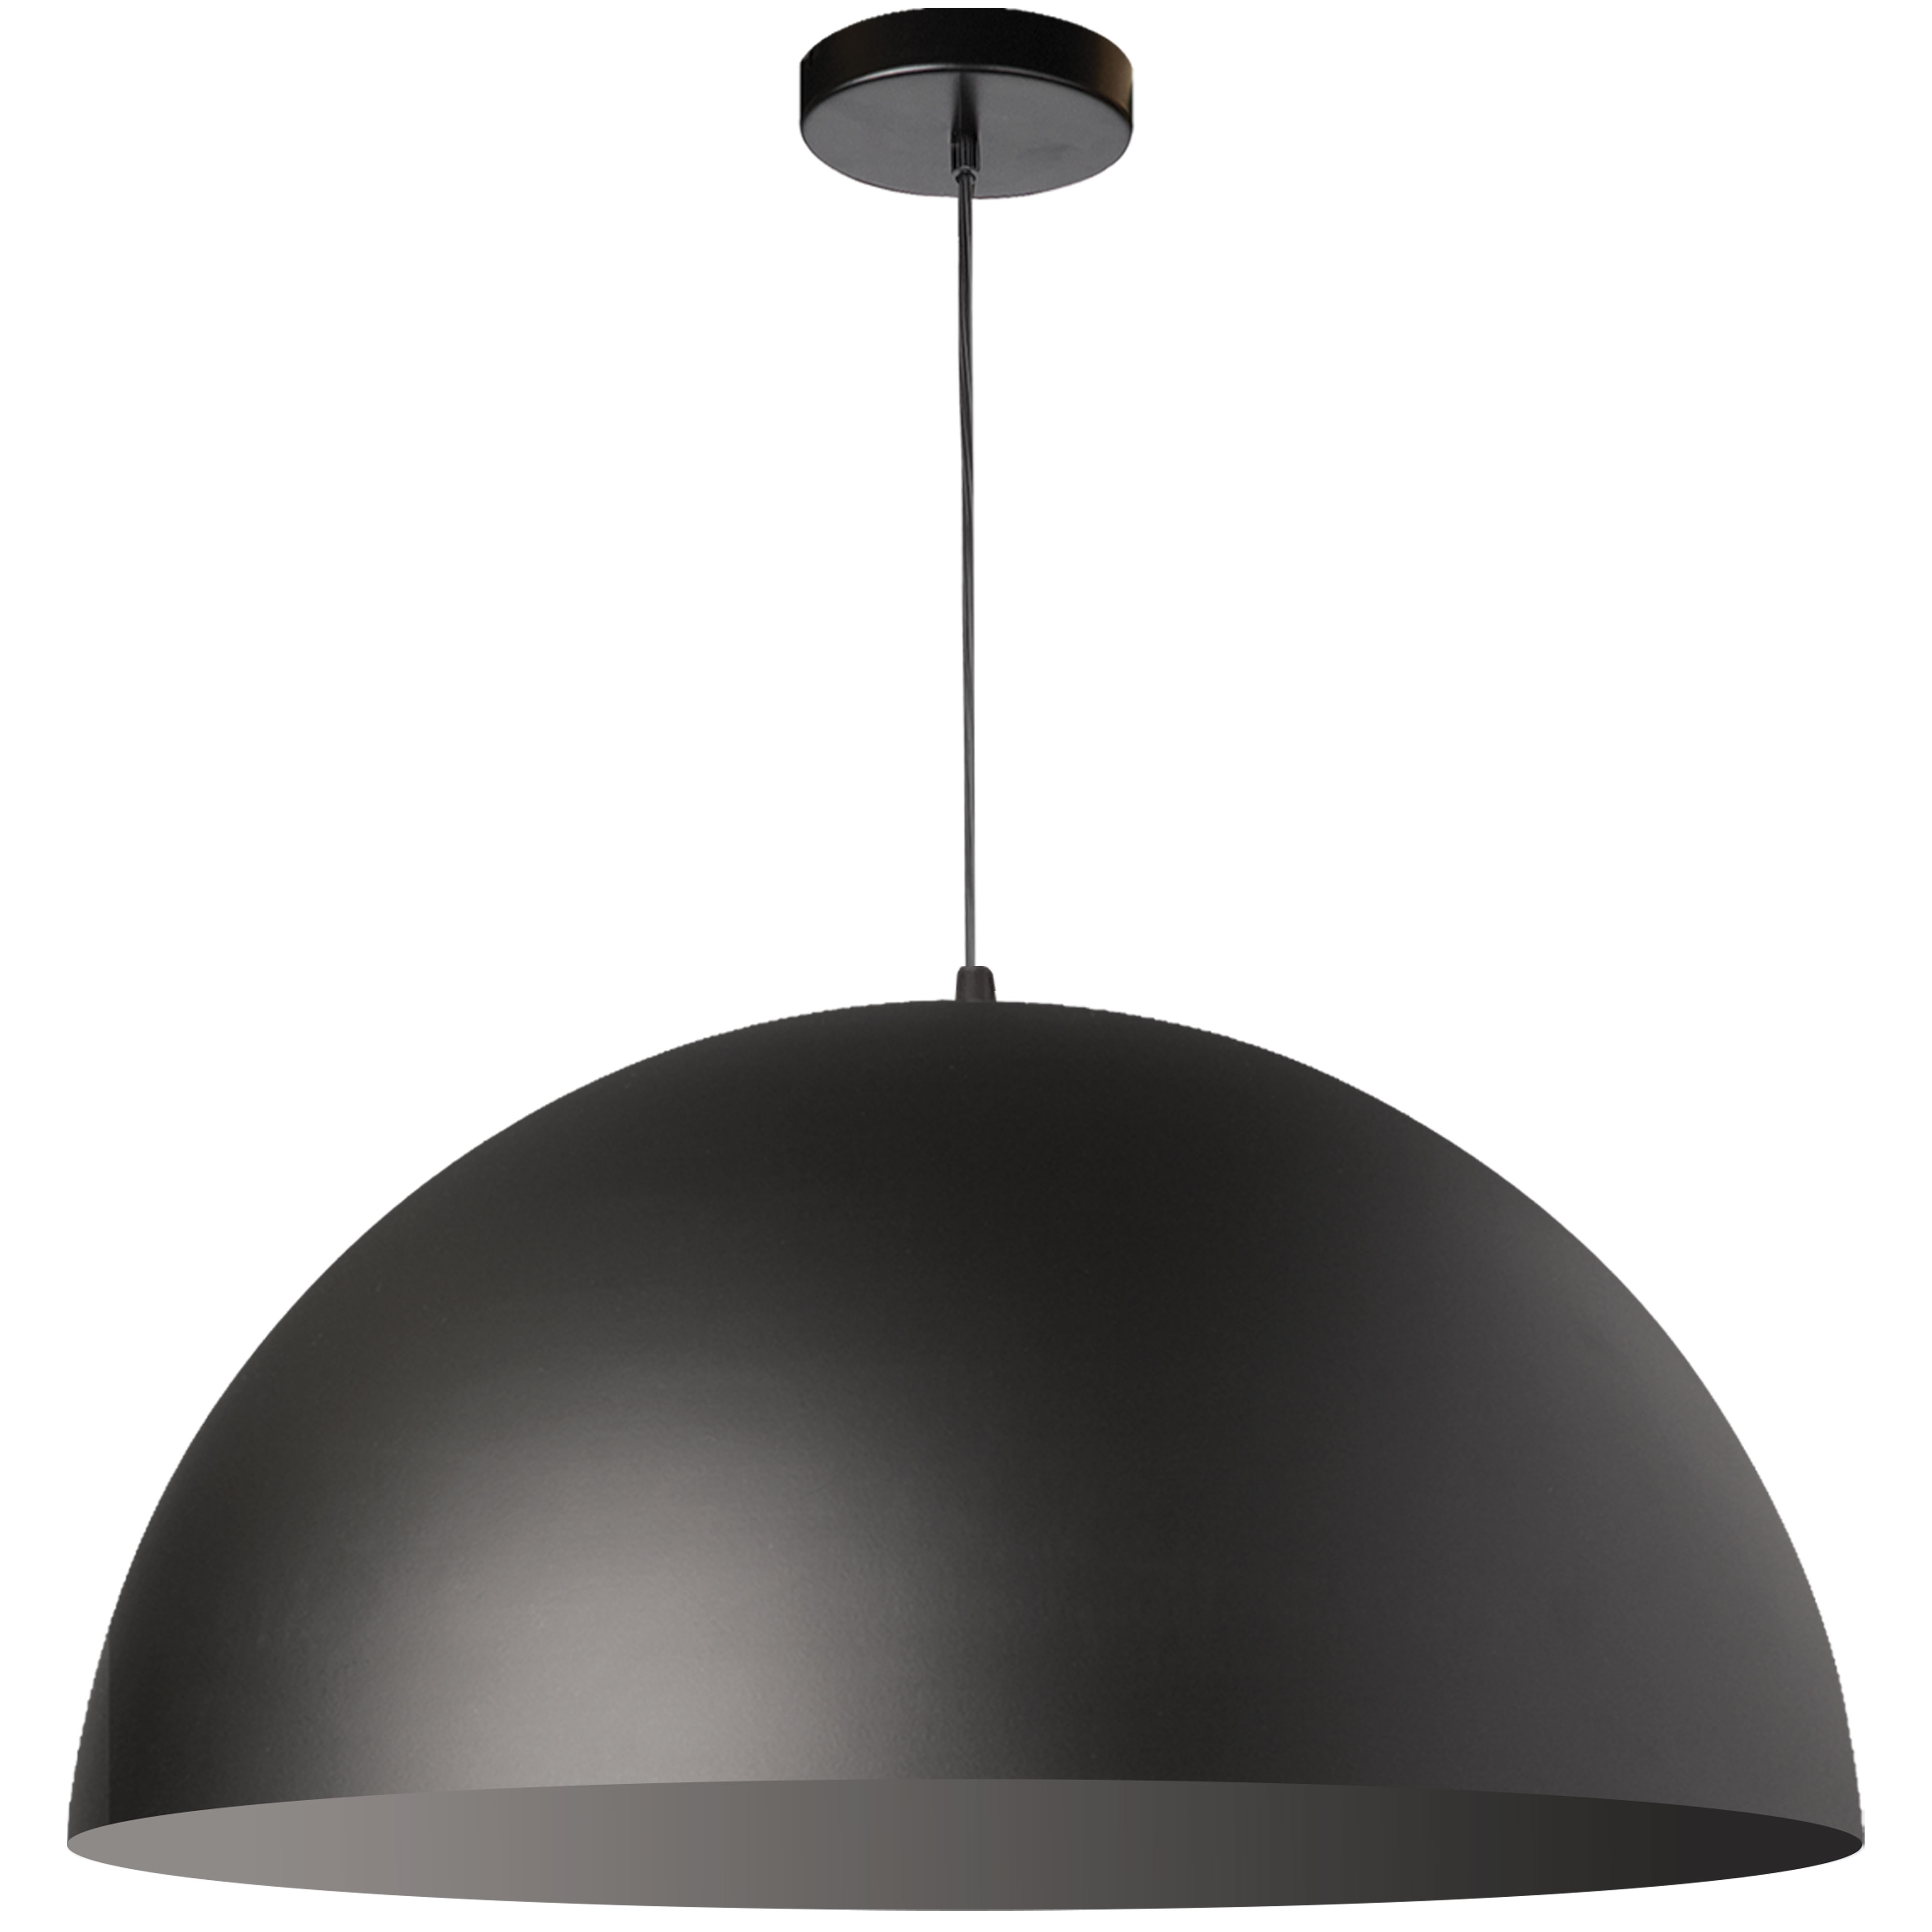 With a sleek yet substantial silhouette, the Ofelia family of lighting sports an iconic look that can work within the framework of mid-century to ultra-modern décors. Ofelia lighting adds clean lines and appealing curves that will enhance minimalist and modern furnishings. The all metal design drops to a dome shade, with color options that include monochromatic as well as contrasting inner and outer finishes. It's a sturdy design, offering bright illumination as well as style. Ofelia lighting will add a nice contrast to the smooth surfaces of a kitchen, and add an artistic presence to a foyer or main hallway.